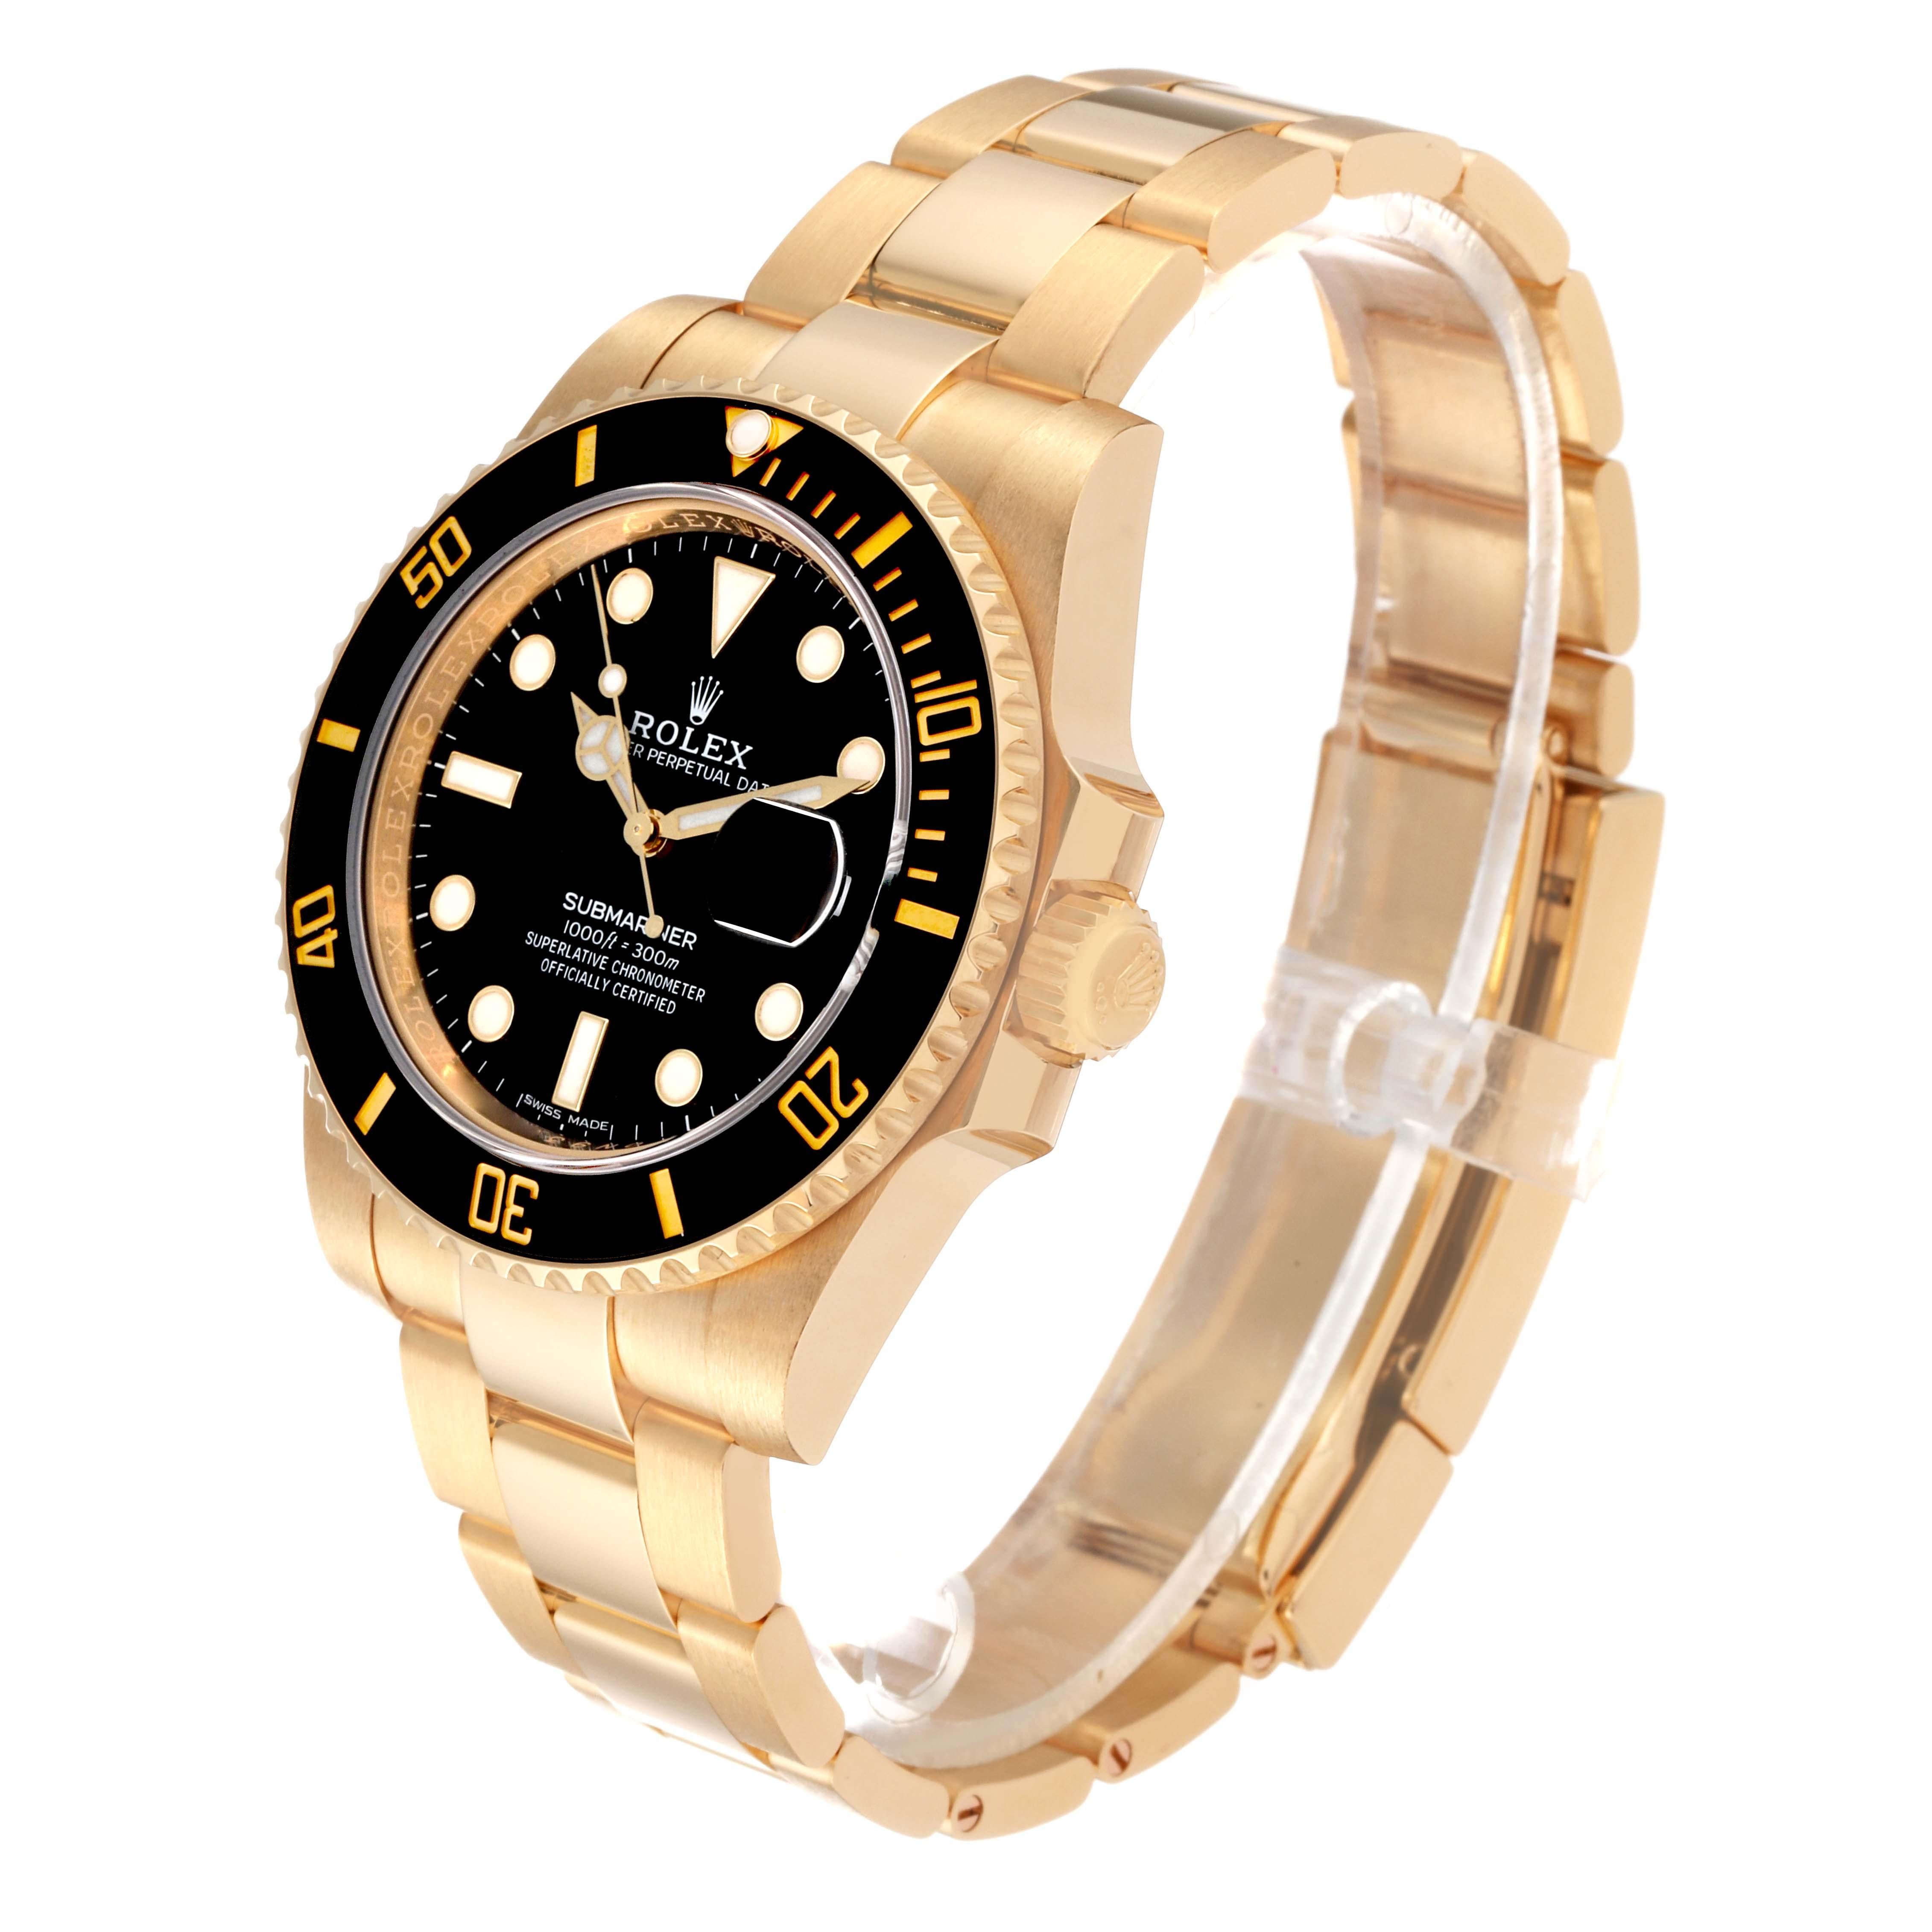 Rolex Submariner Black Dial Yellow Gold Mens Watch 116618 Box Card For Sale 7